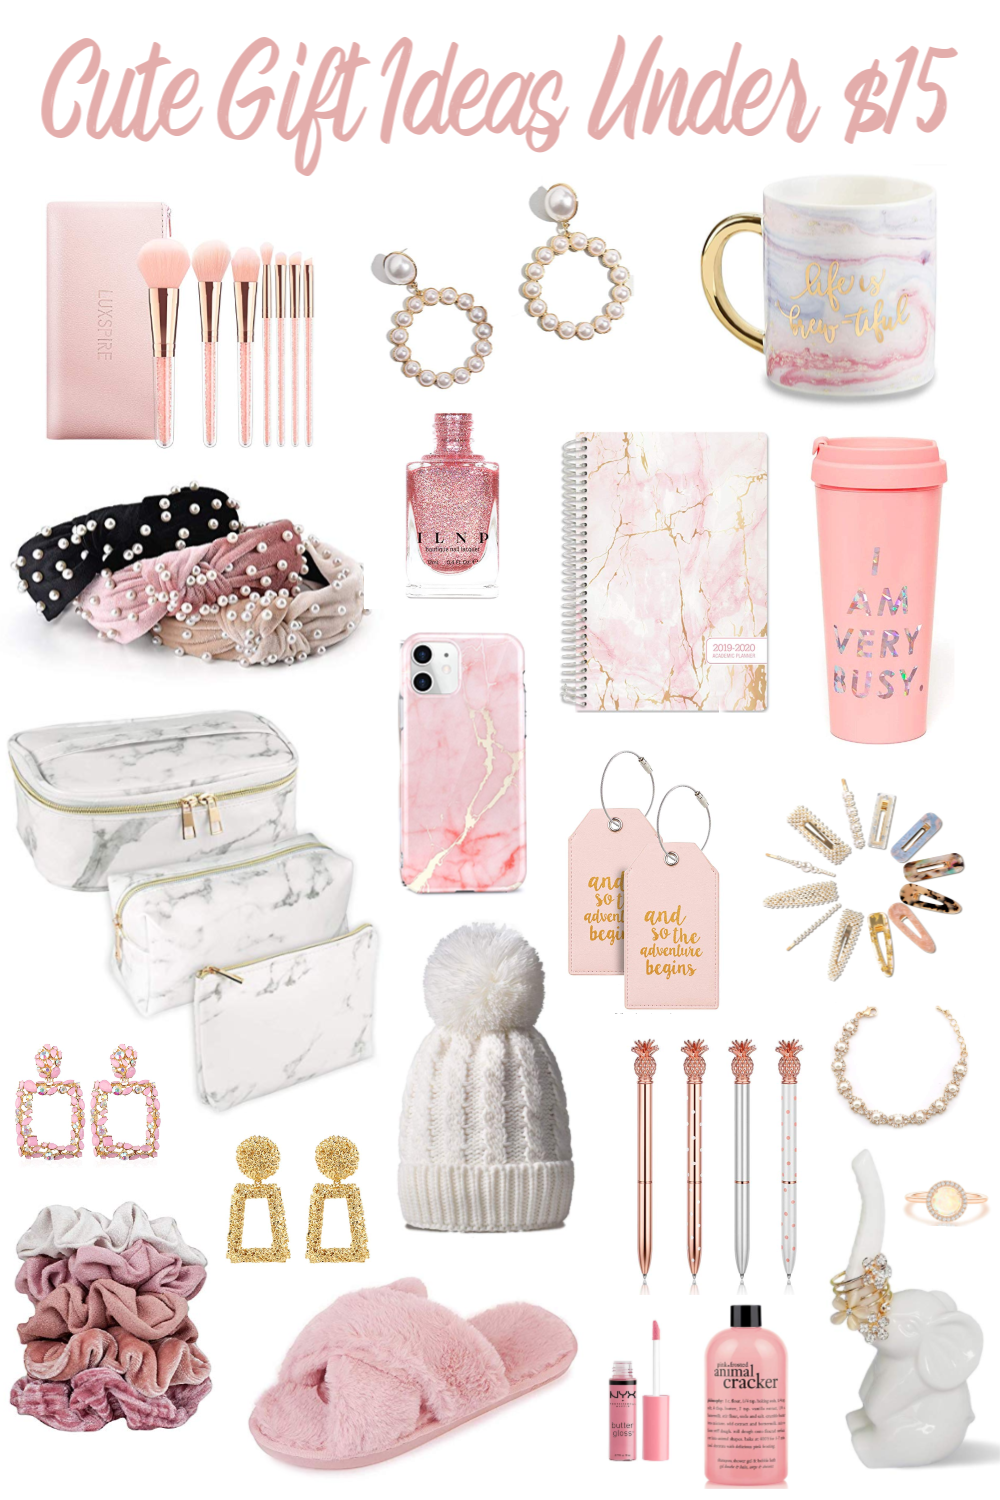 Cute Gift Ideas Under $16 -   17 holiday Gifts for girls ideas